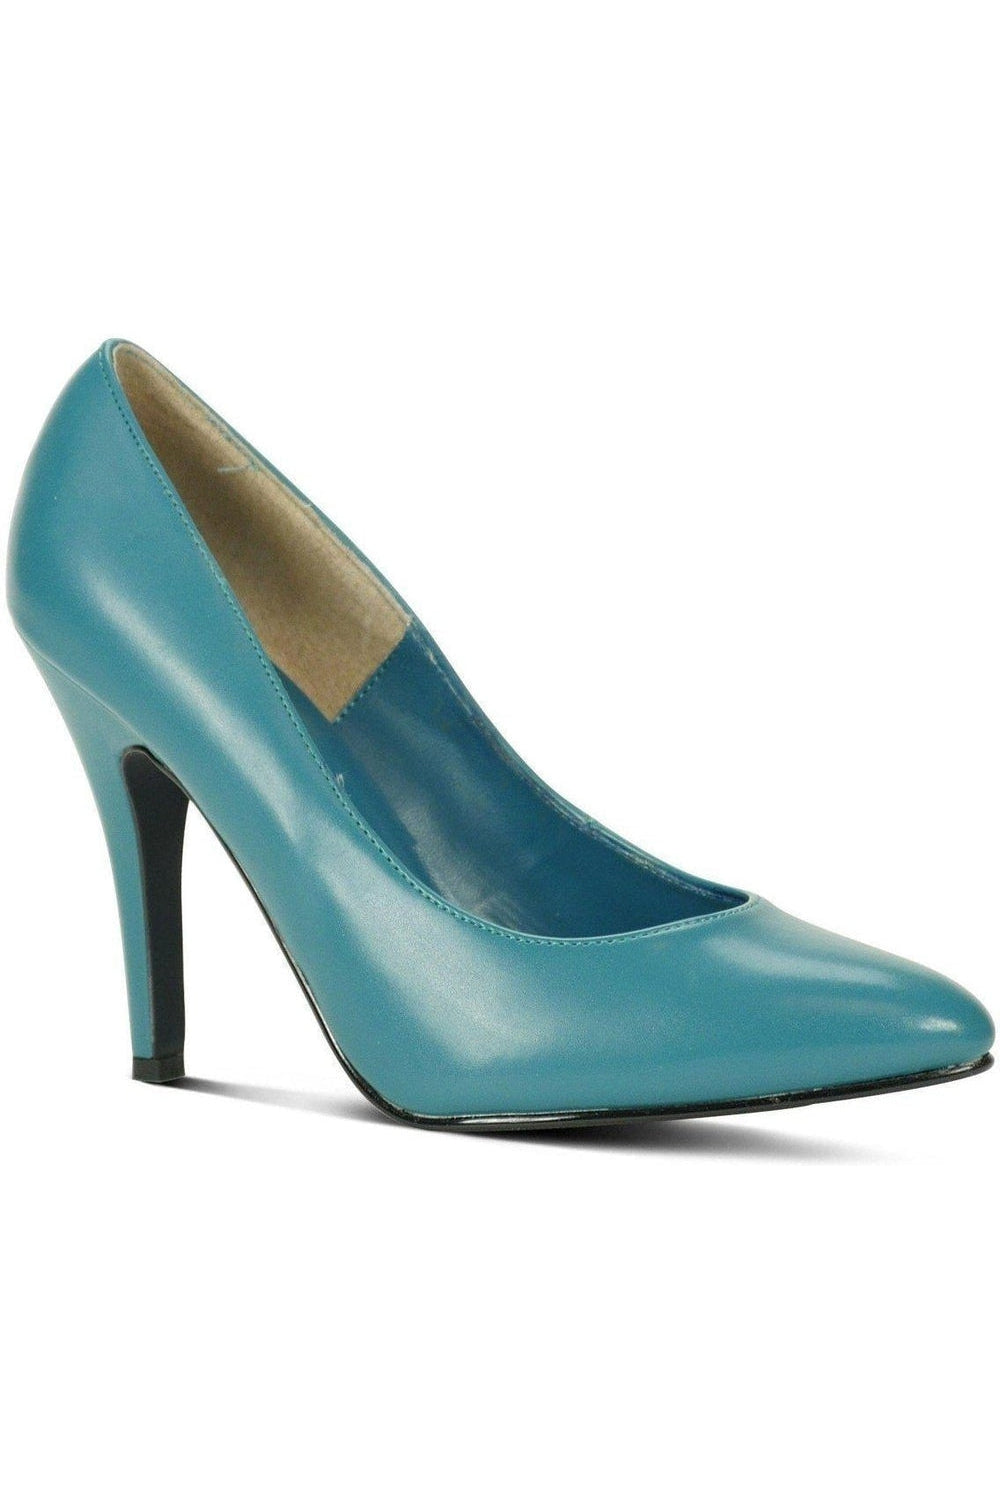 Fashions Pump-Turquoise-Sexyshoes Brand-Turquoise-Pumps-SEXYSHOES.COM